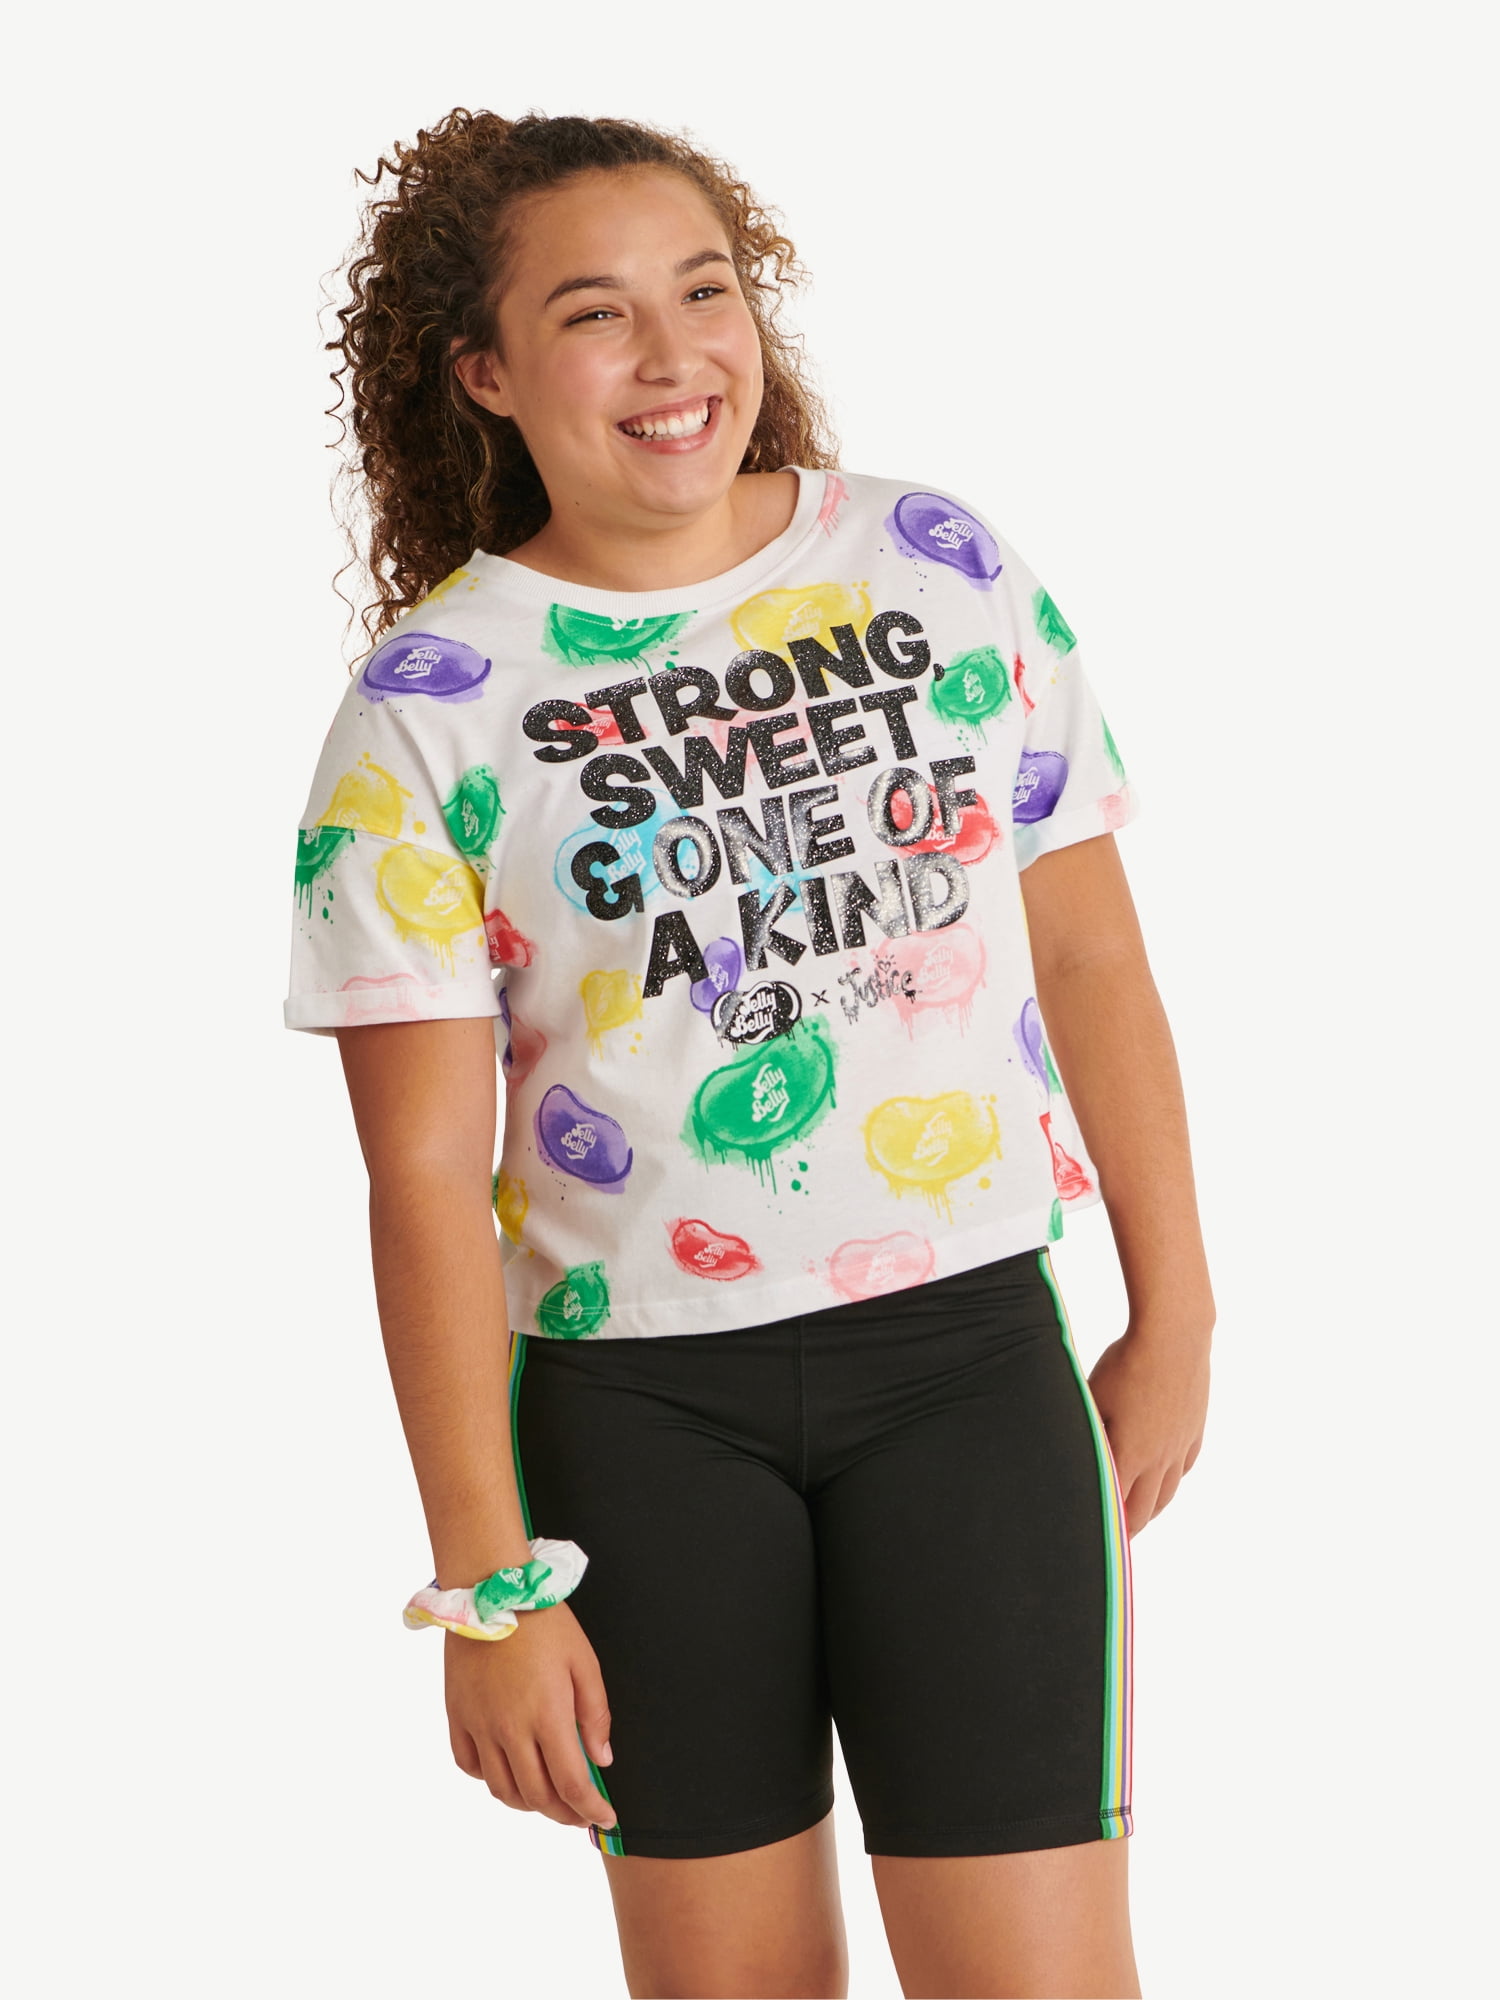 Justice x Jelly Belly Girl's Easy Bean Graphic T-Shirt, Sizes XS-XLP